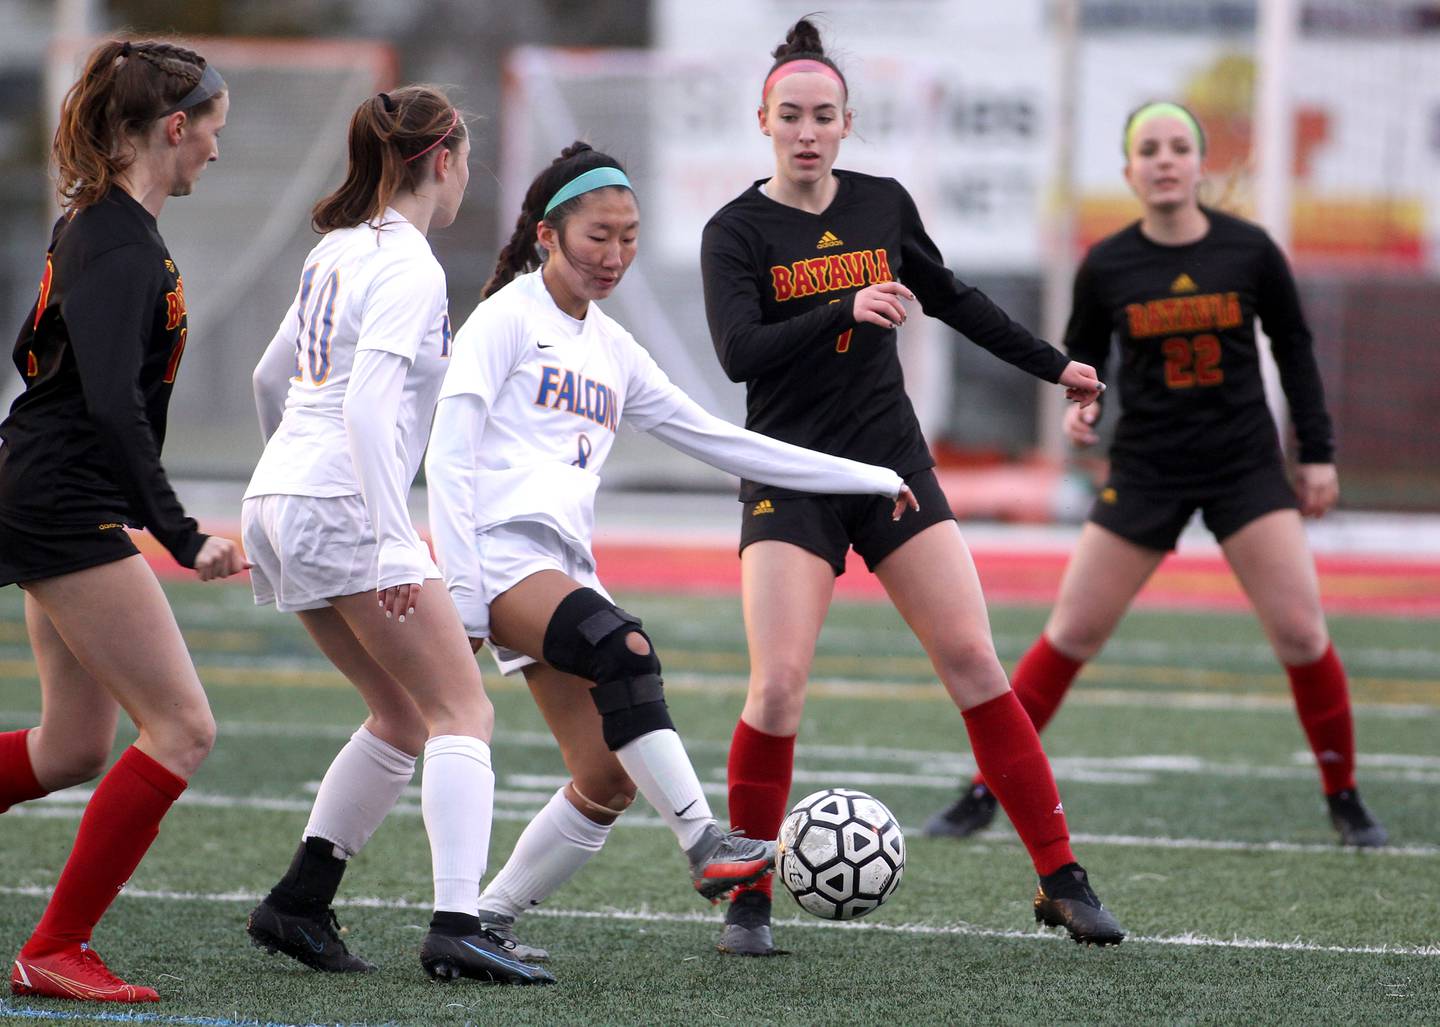 Wheaton North’s Claudia Kim (8) gets control of the ball during a game at Batavia on Thursday, April 7, 2022.